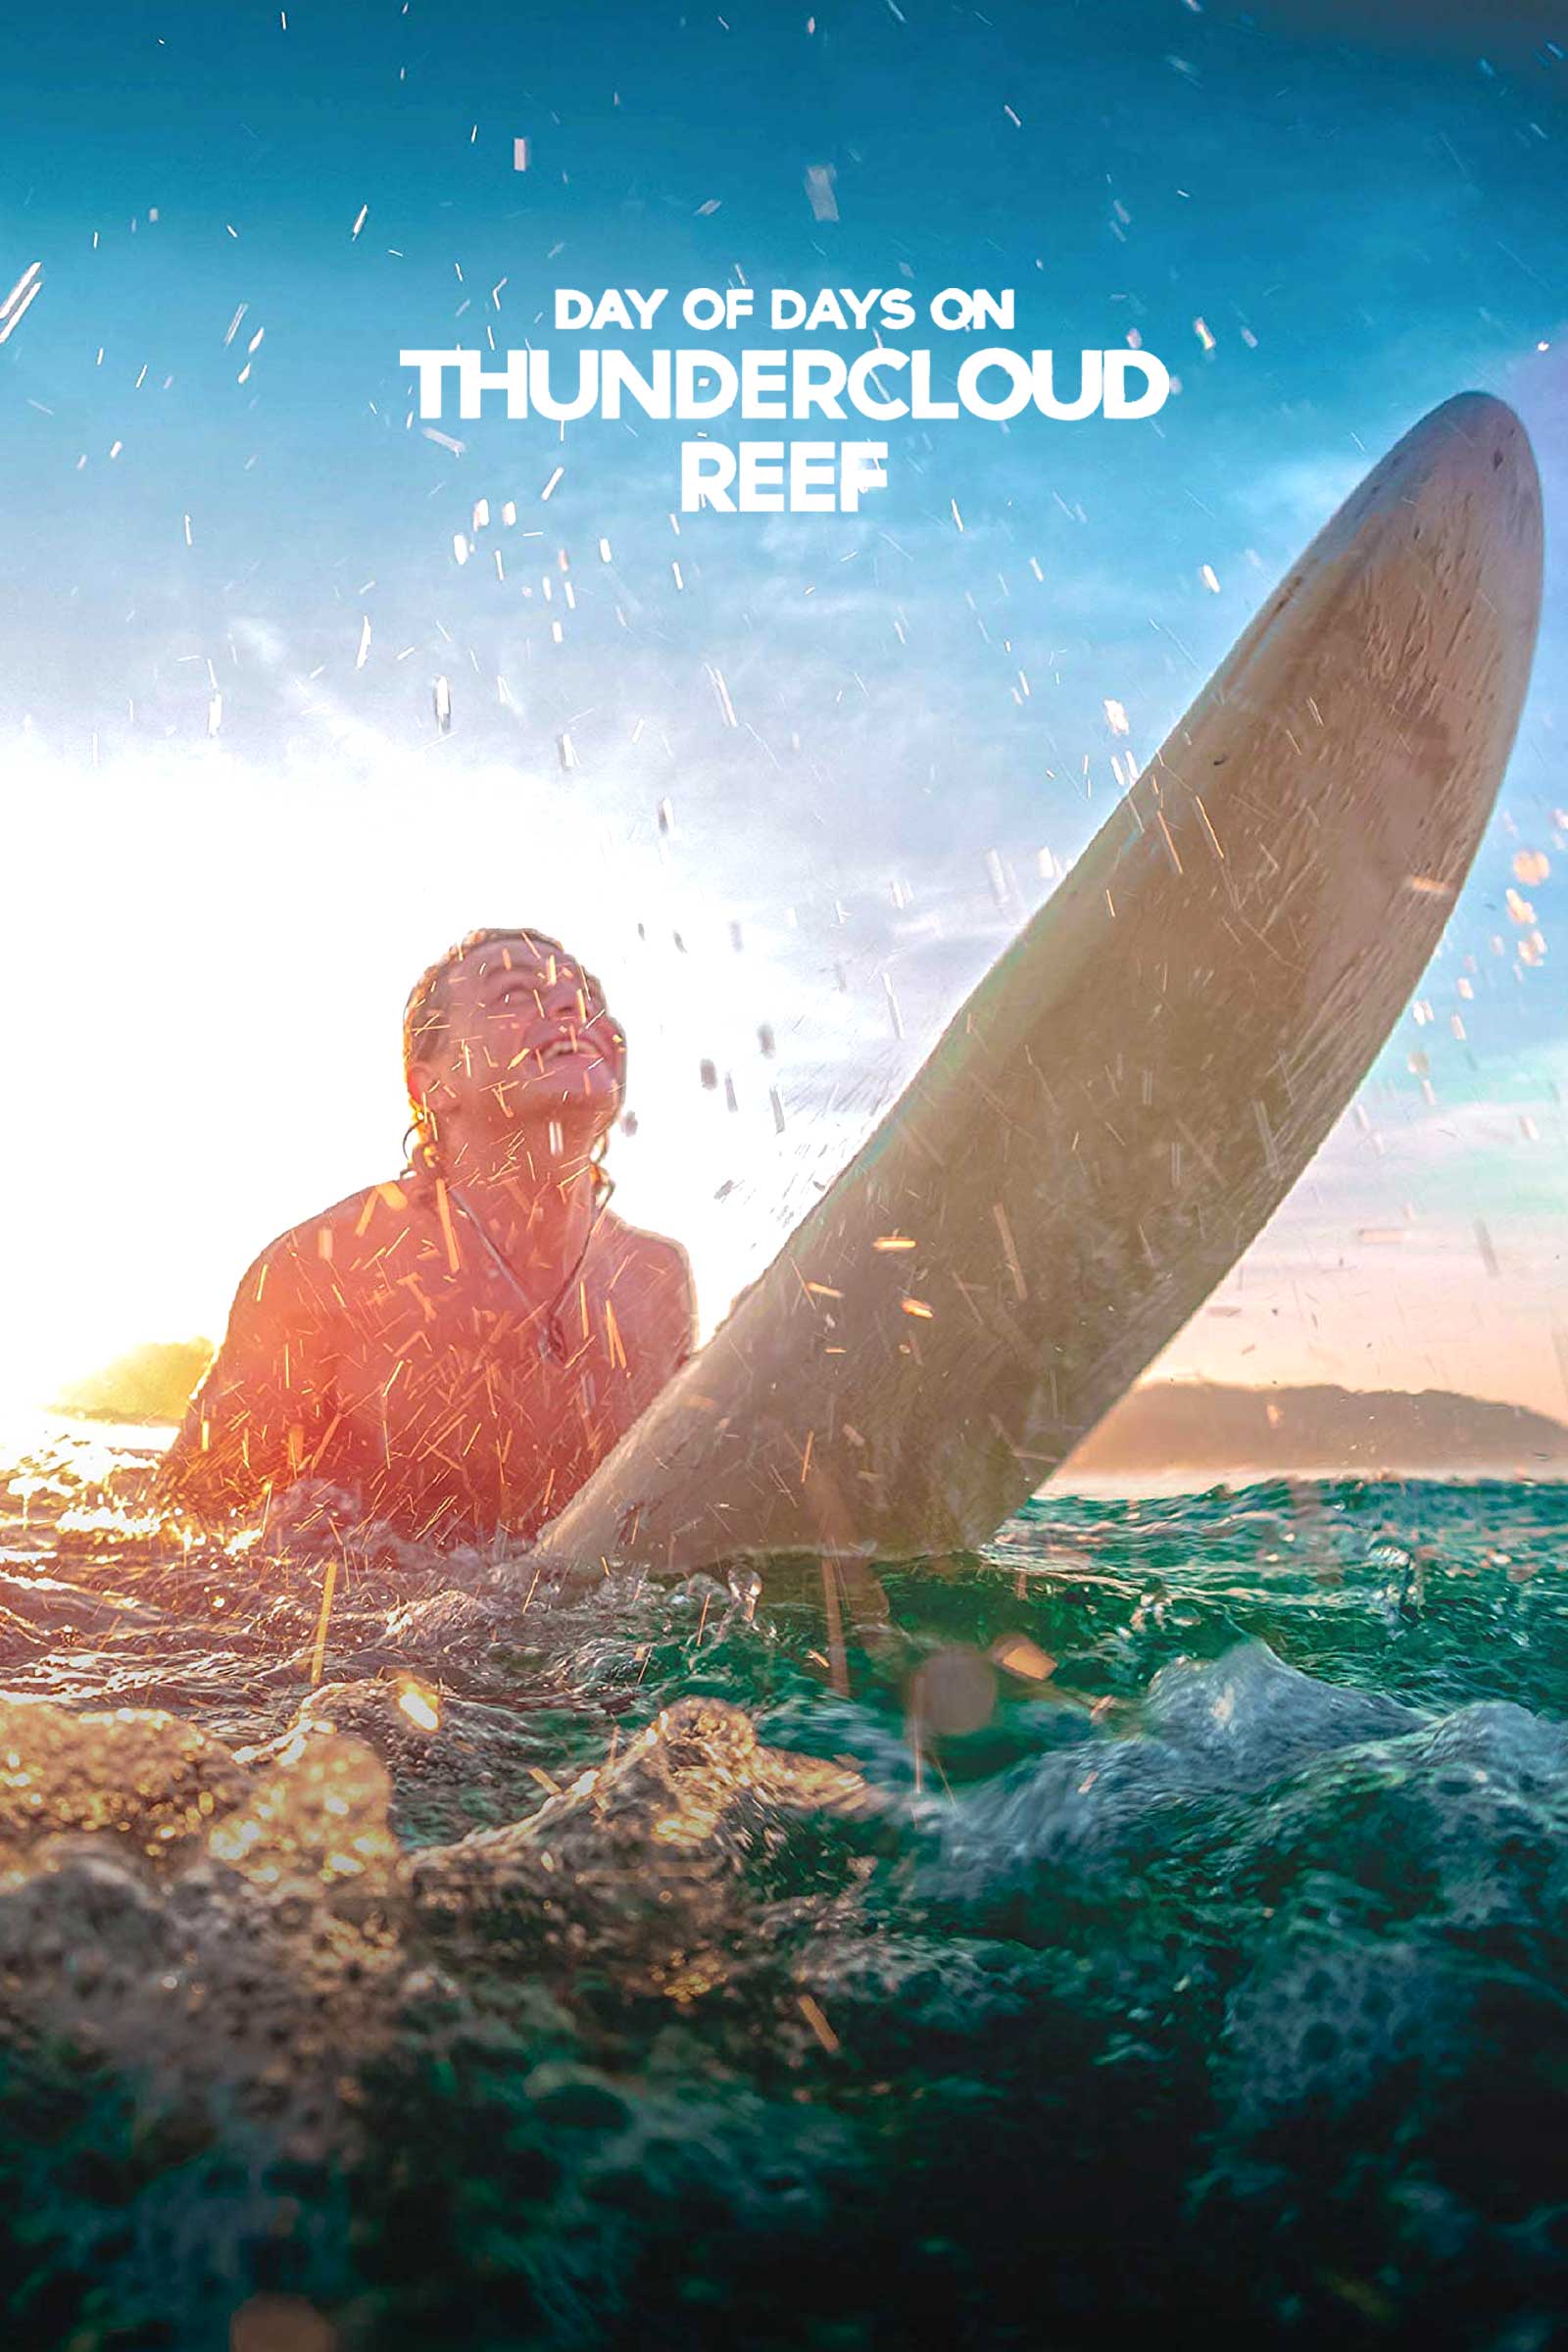 Where to stream Day of Days on Thundercloud Reef